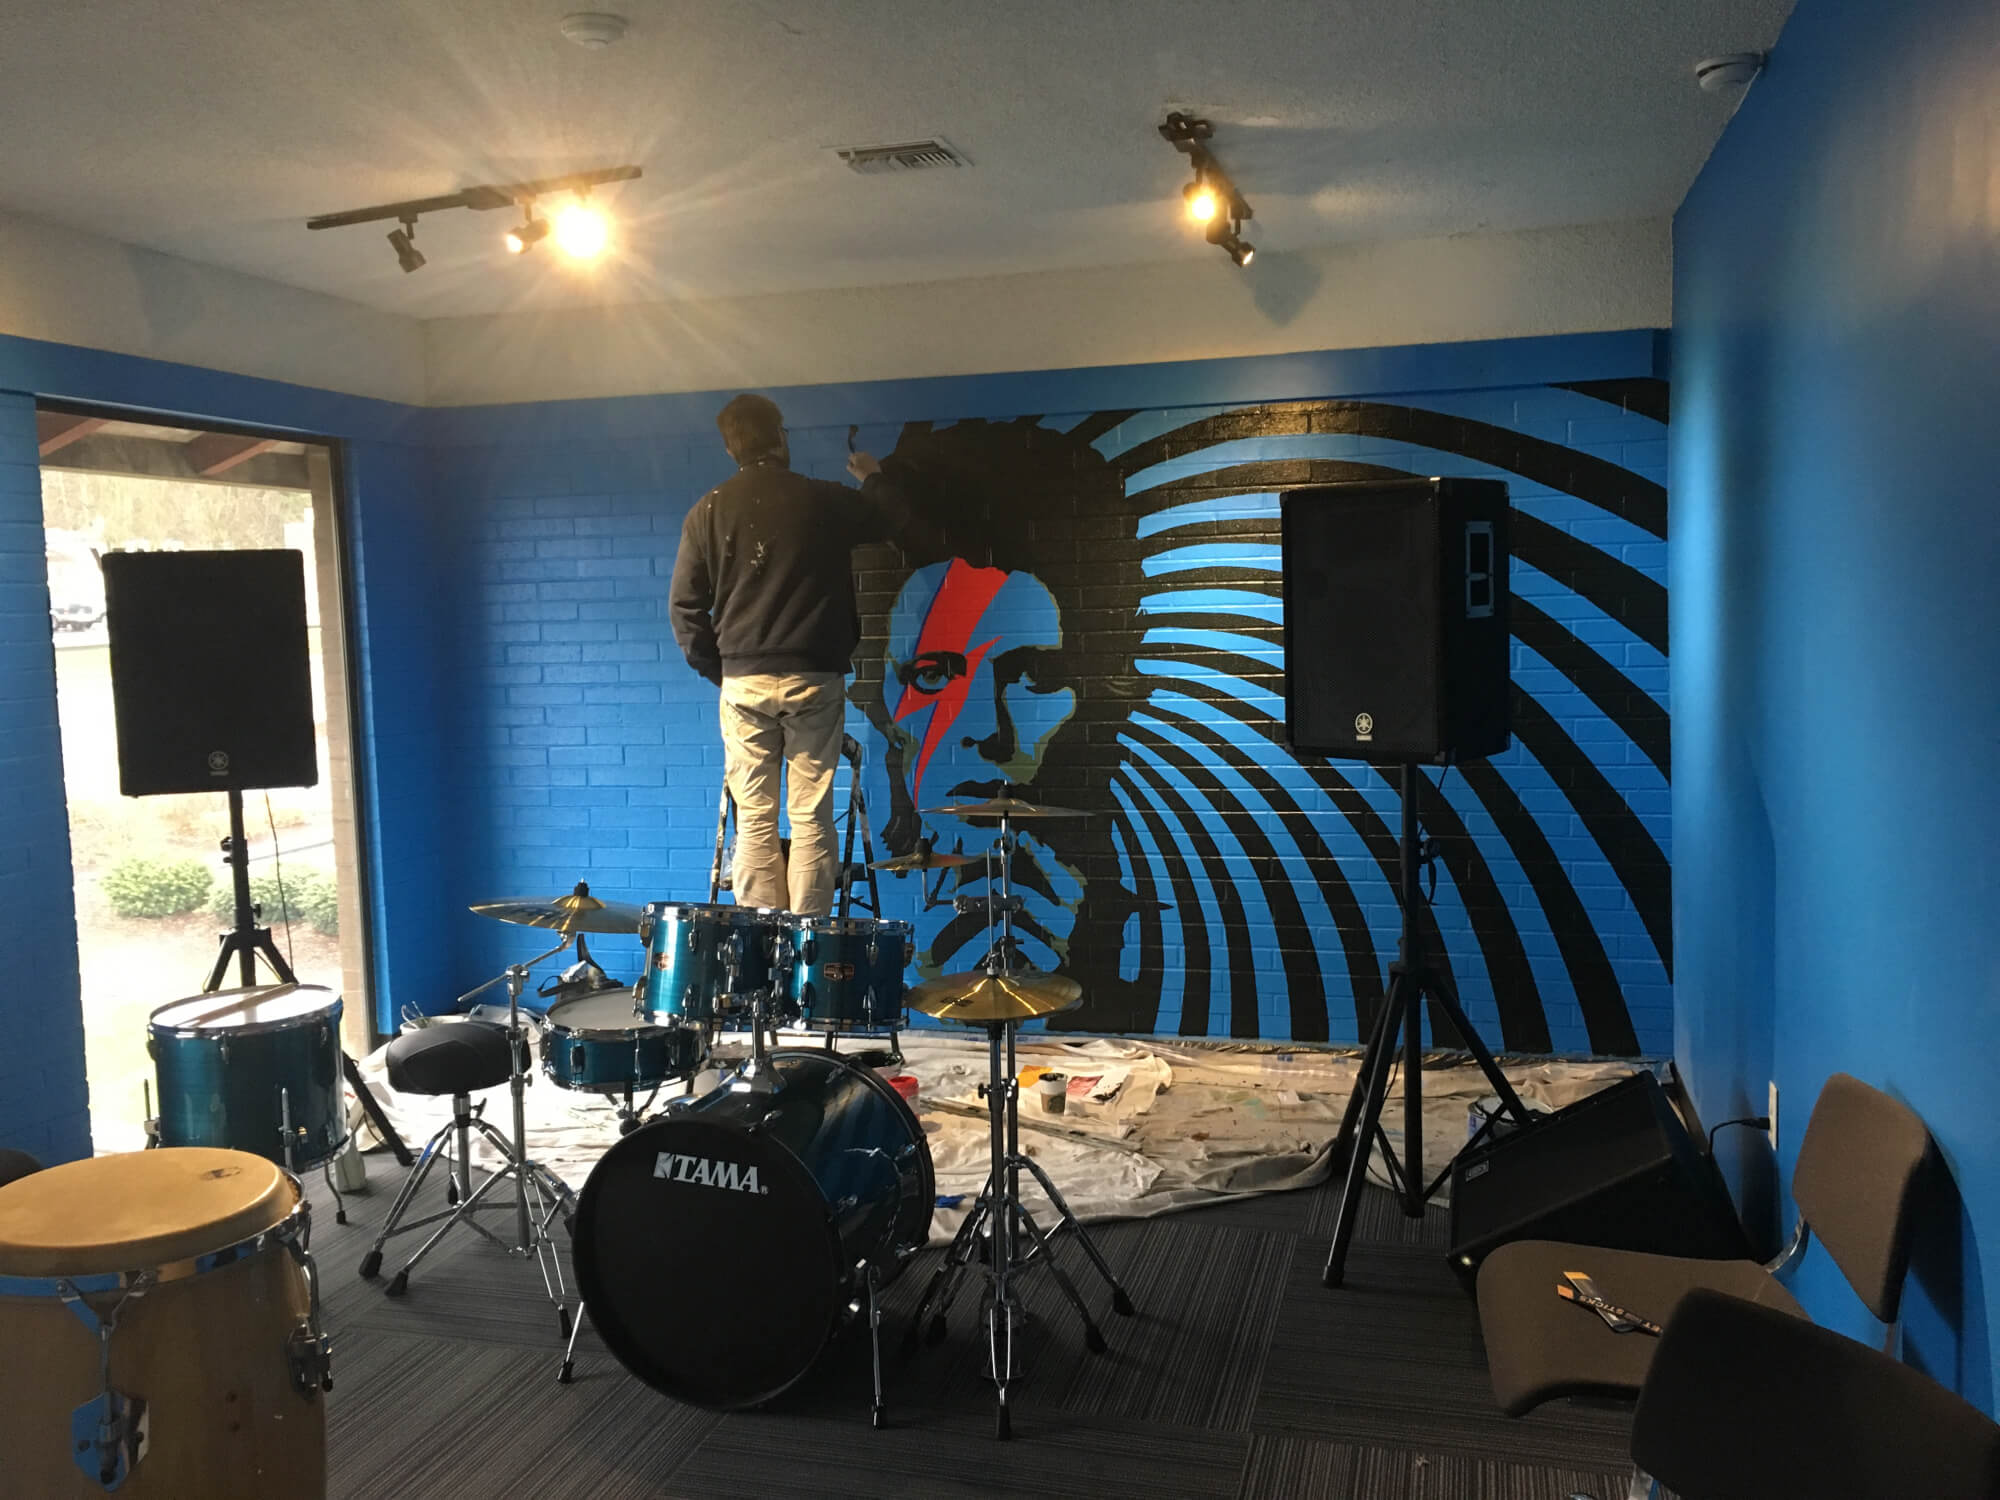 Adding some rehearsal room inspiration! Call [[PHONE]] to schedule a tour of our space in Lynnwood.